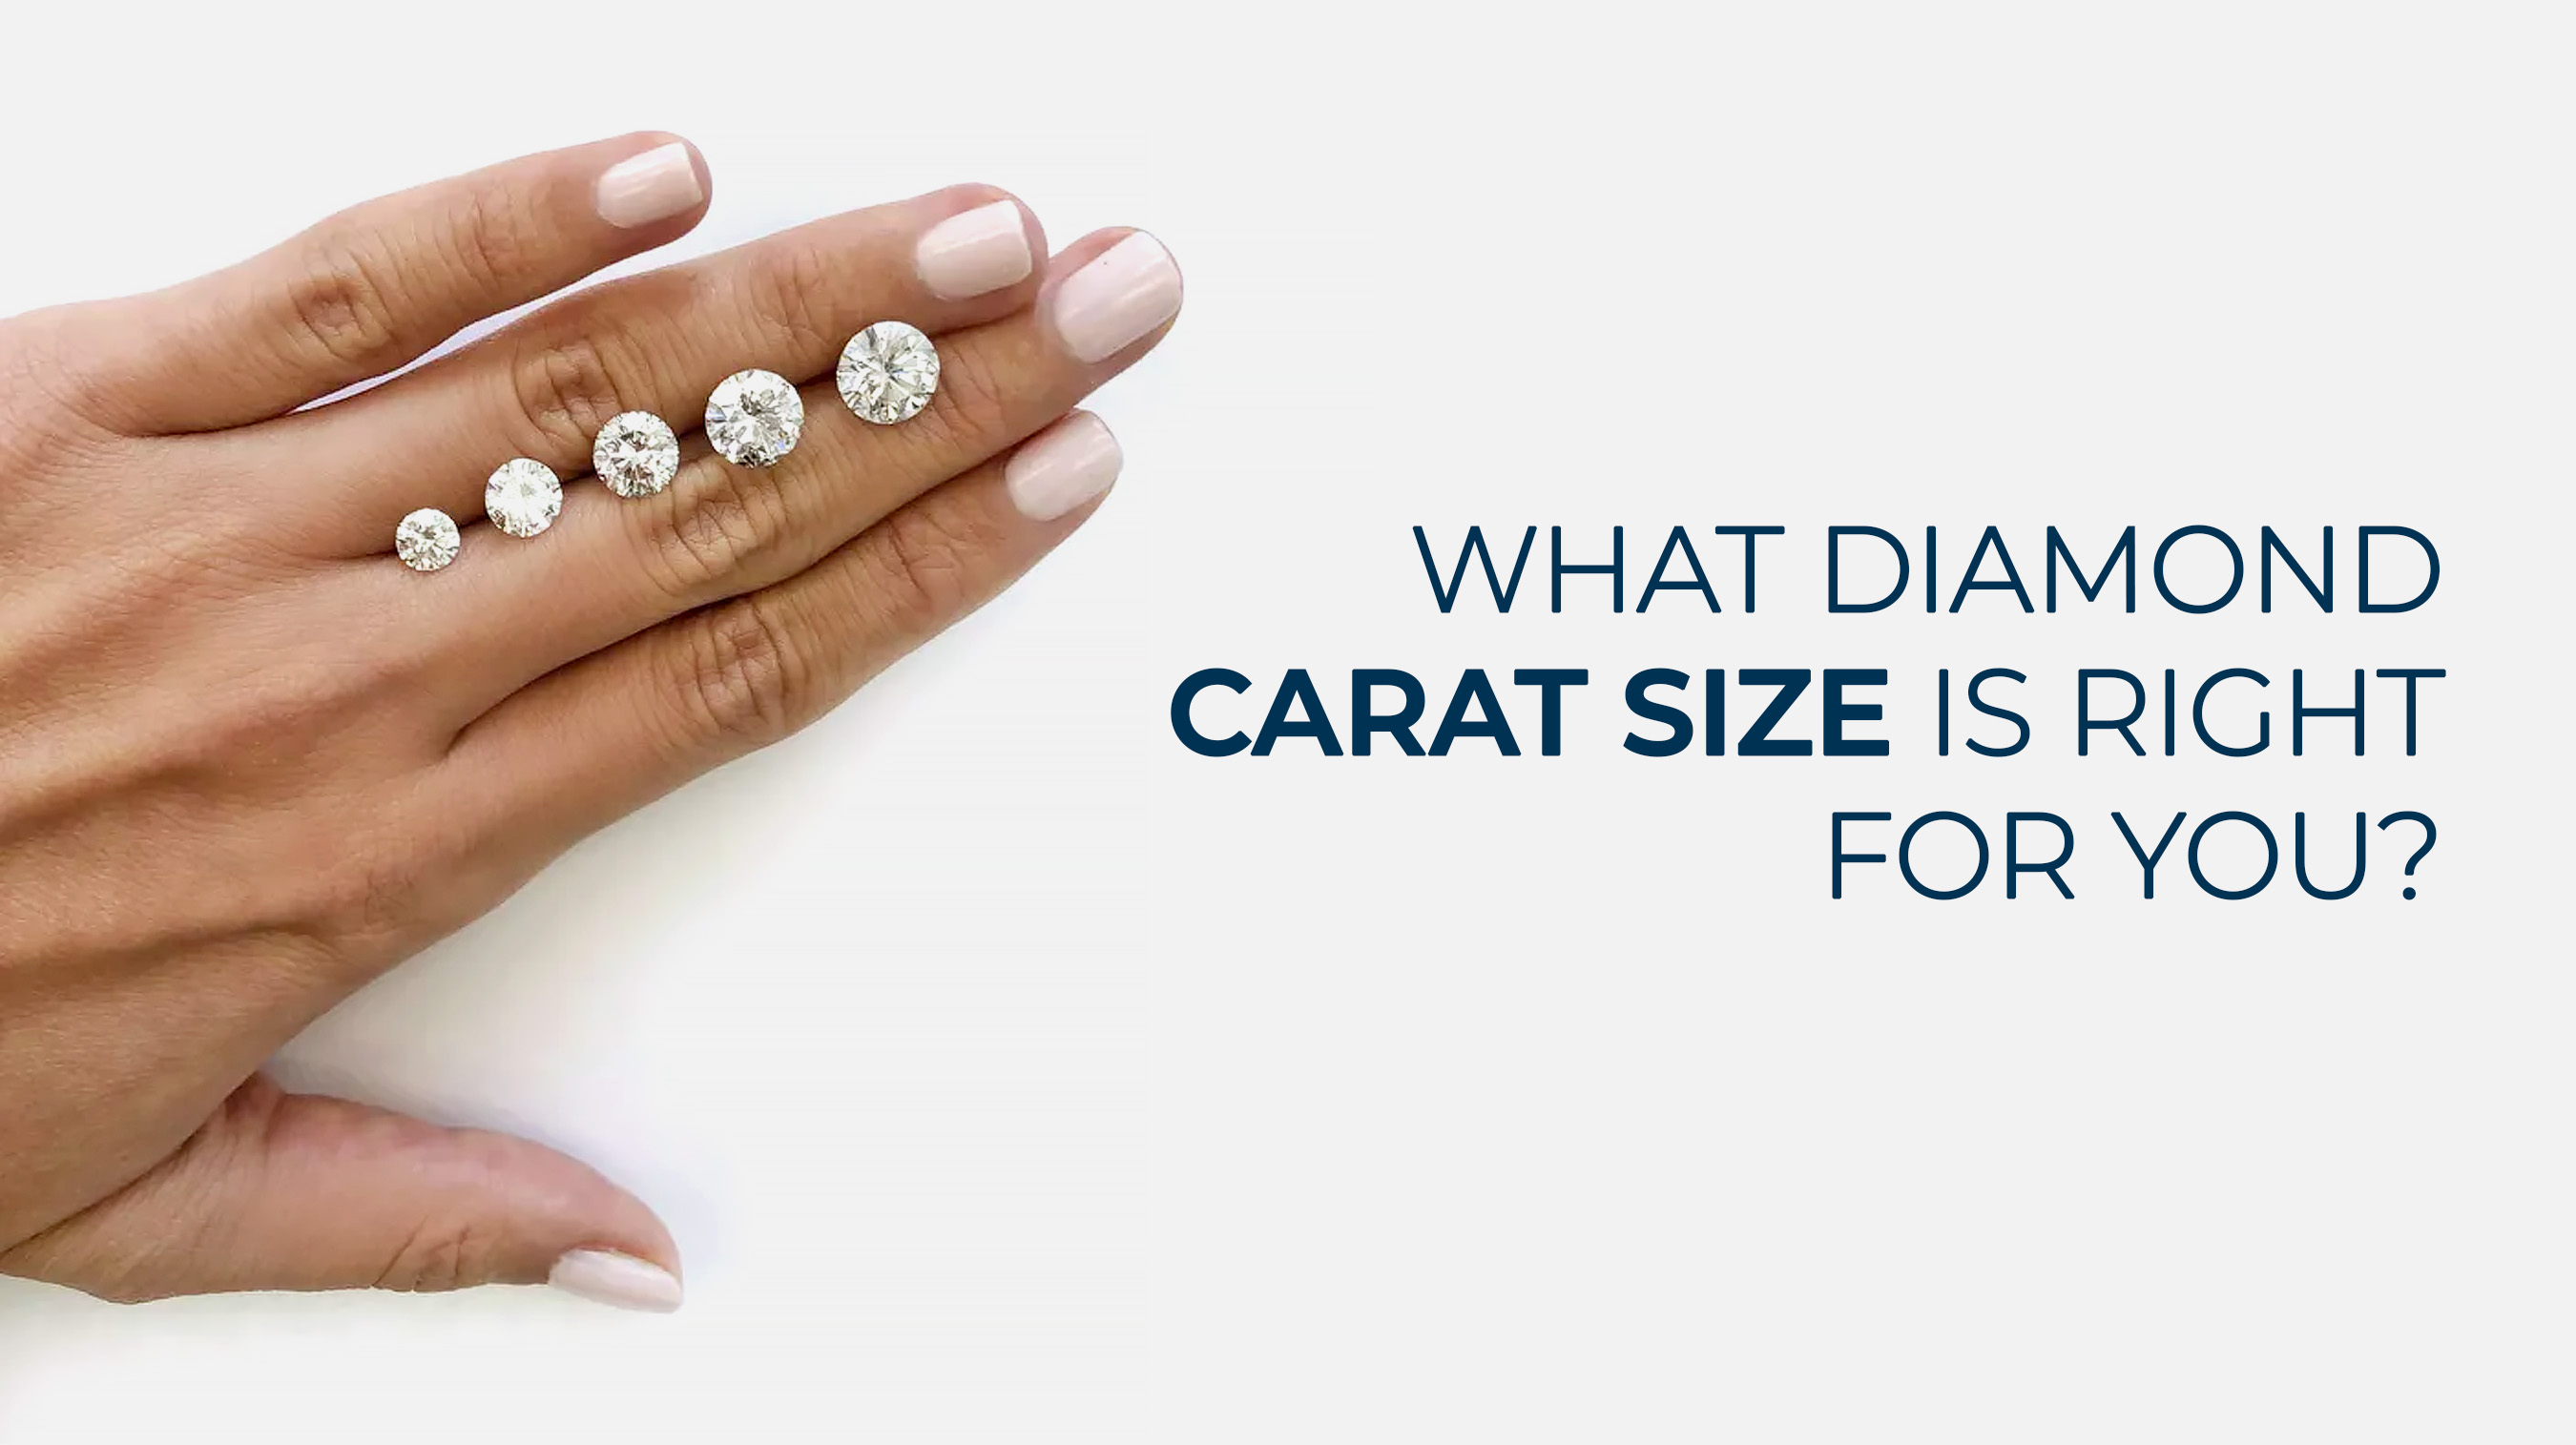 What Diamond Carat Size Is Right For You?